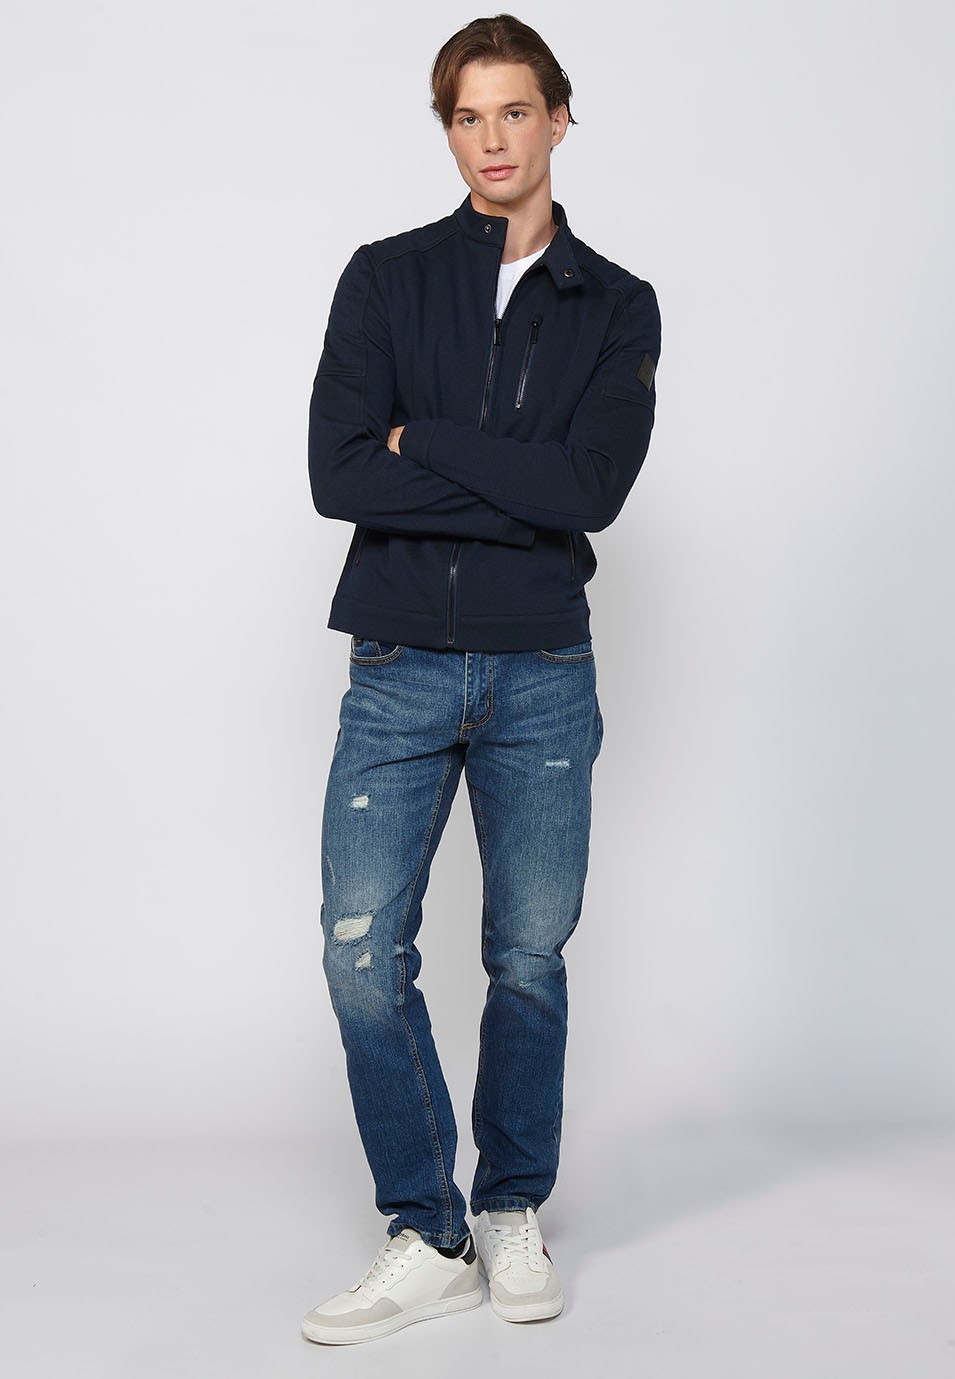 Navy Long Sleeve Jacket with Round Neck and Front Zipper Closure for Men